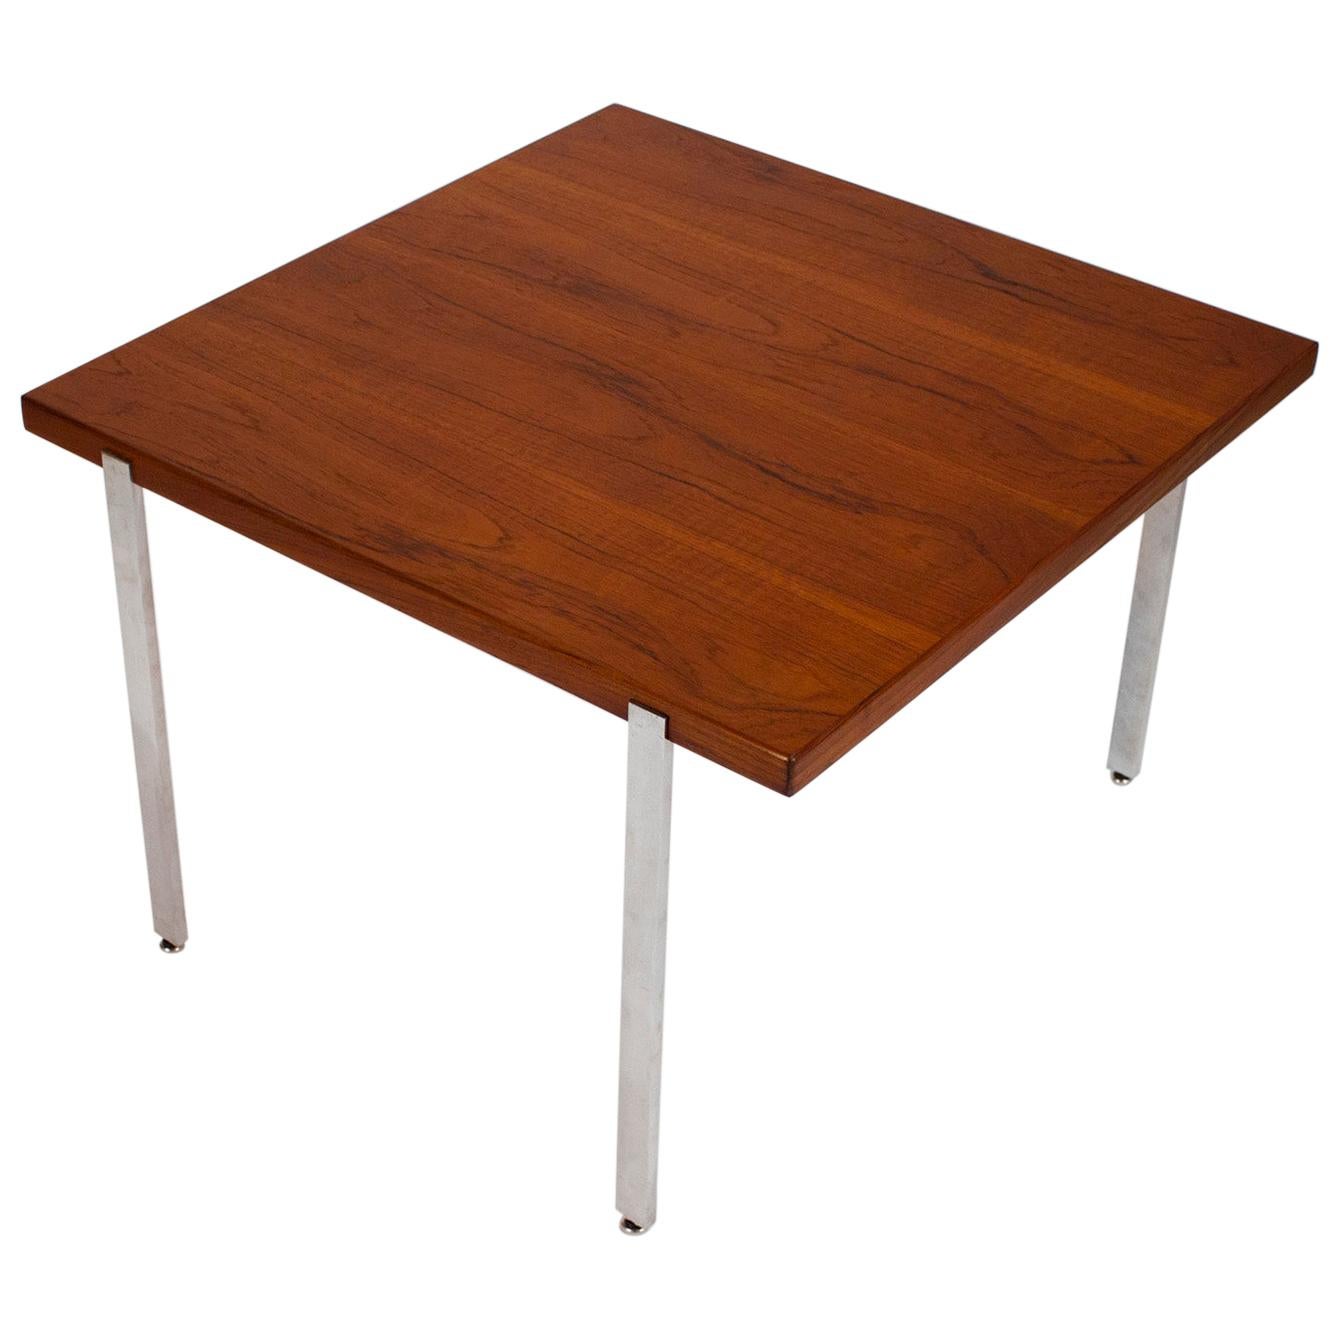 Harvey Probber Side Table in Teak and Polished Stainless Steel, 1960s For Sale